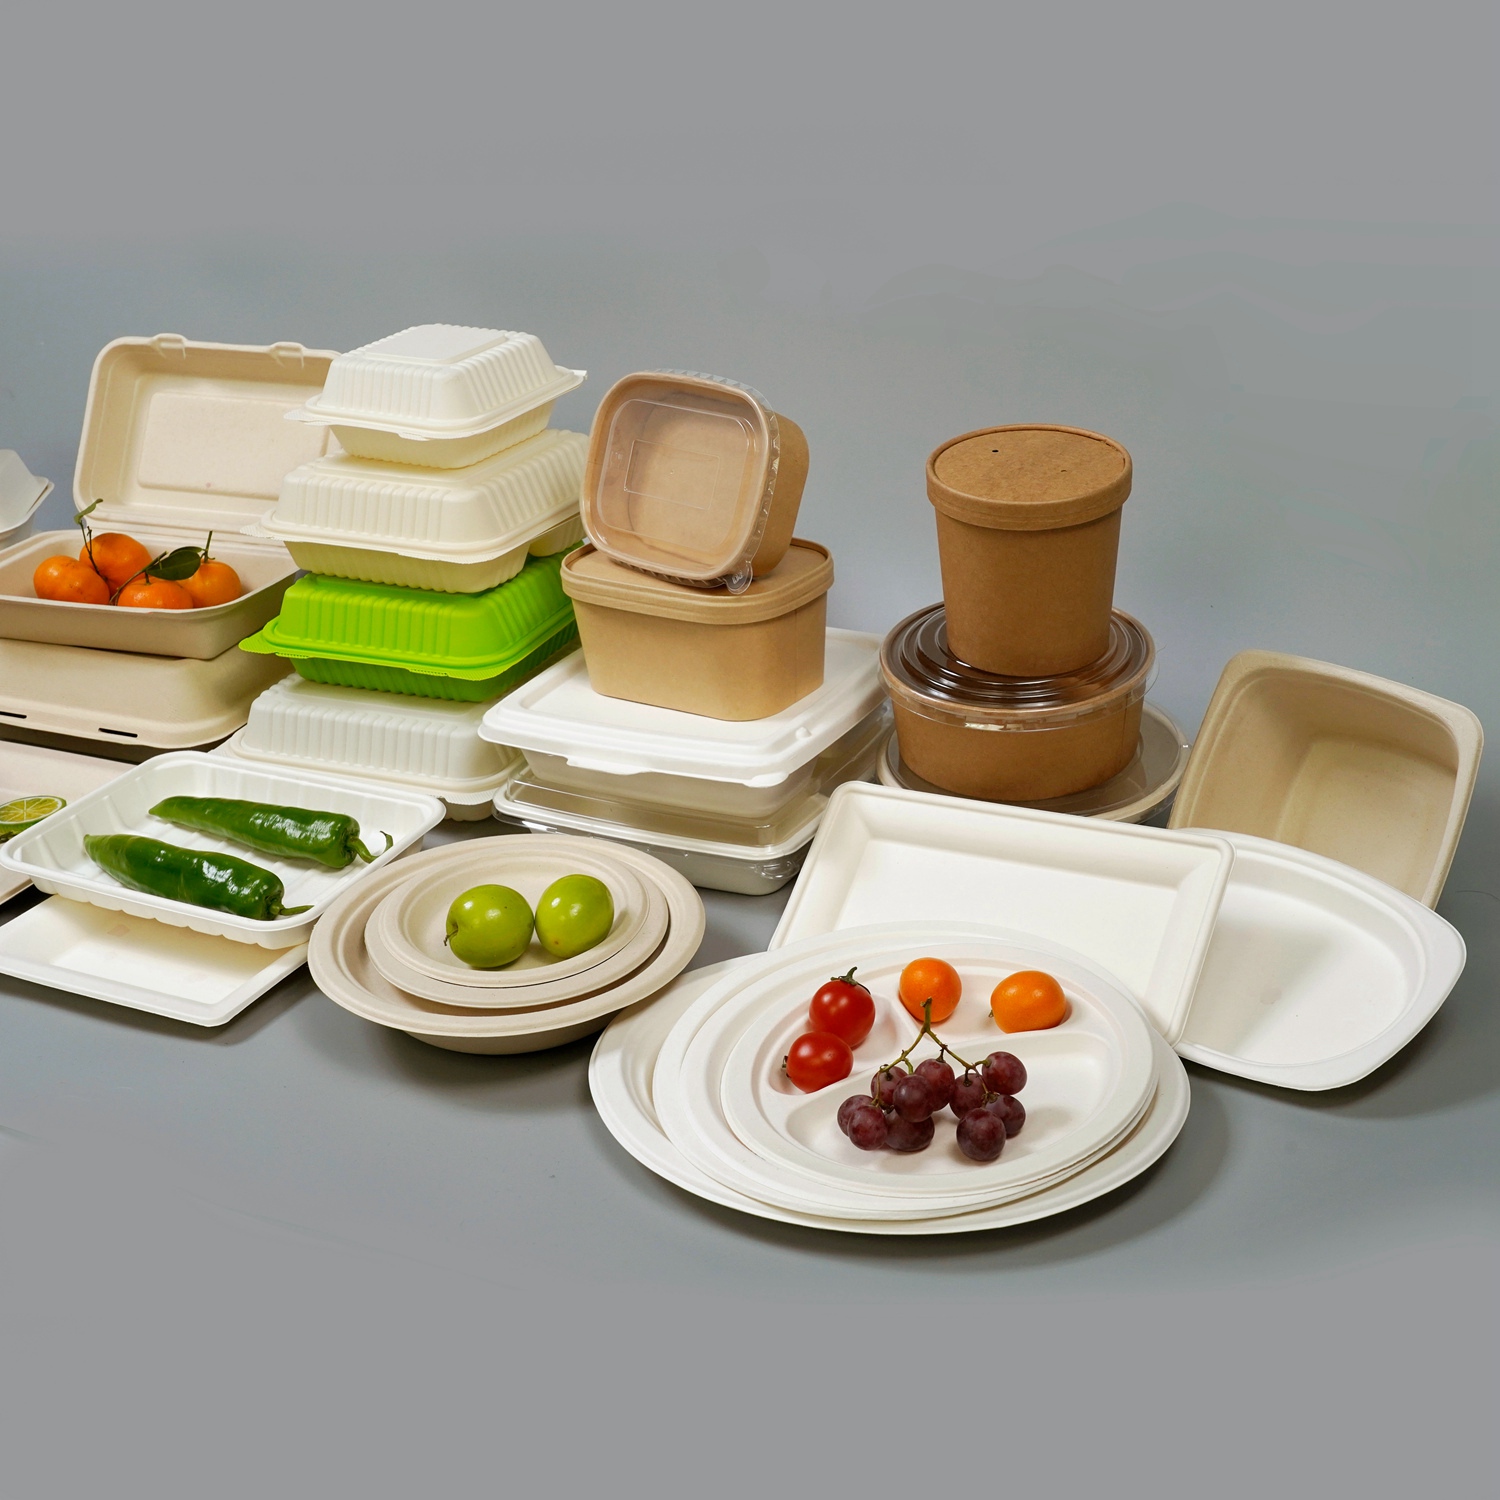 What is the importance of biodegradable and ecofriendly packaging? eco friendly plates and bowls, biodegradable clamshell containers, Eco-Friendly Packaging, biodegradable and ecofriendly packaging